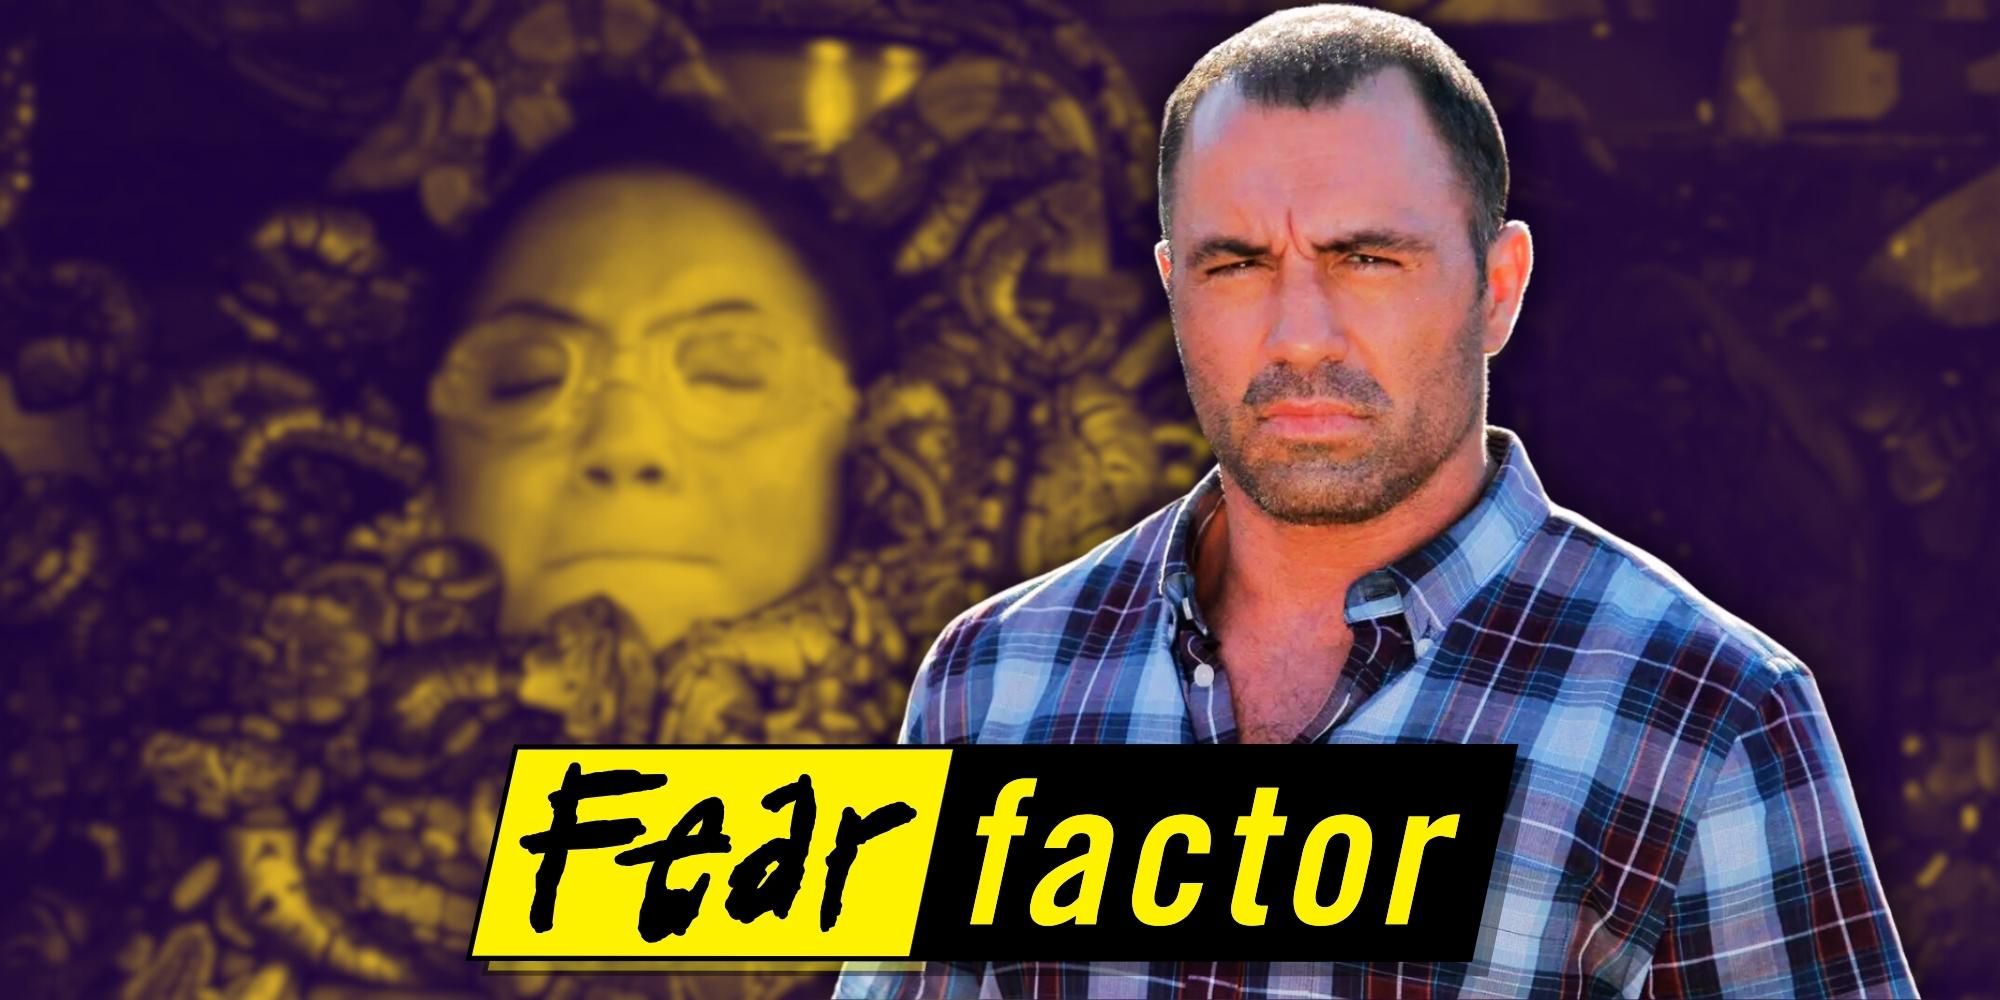  Montage from the show Fear Factor